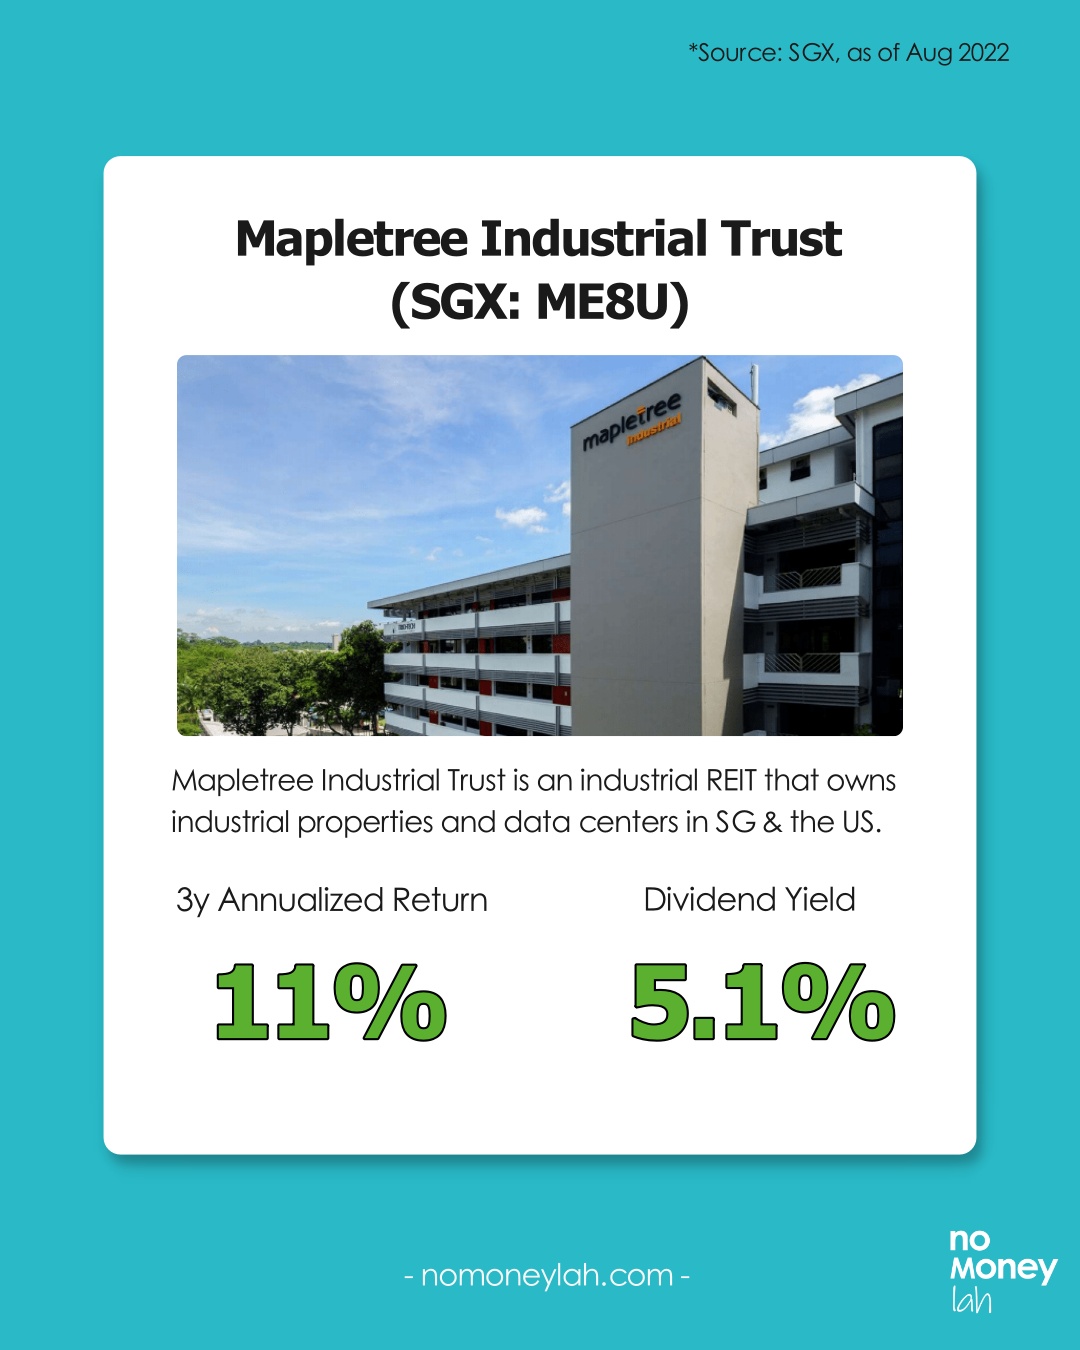 Mapletree Industrial Trust performance & dividend yield